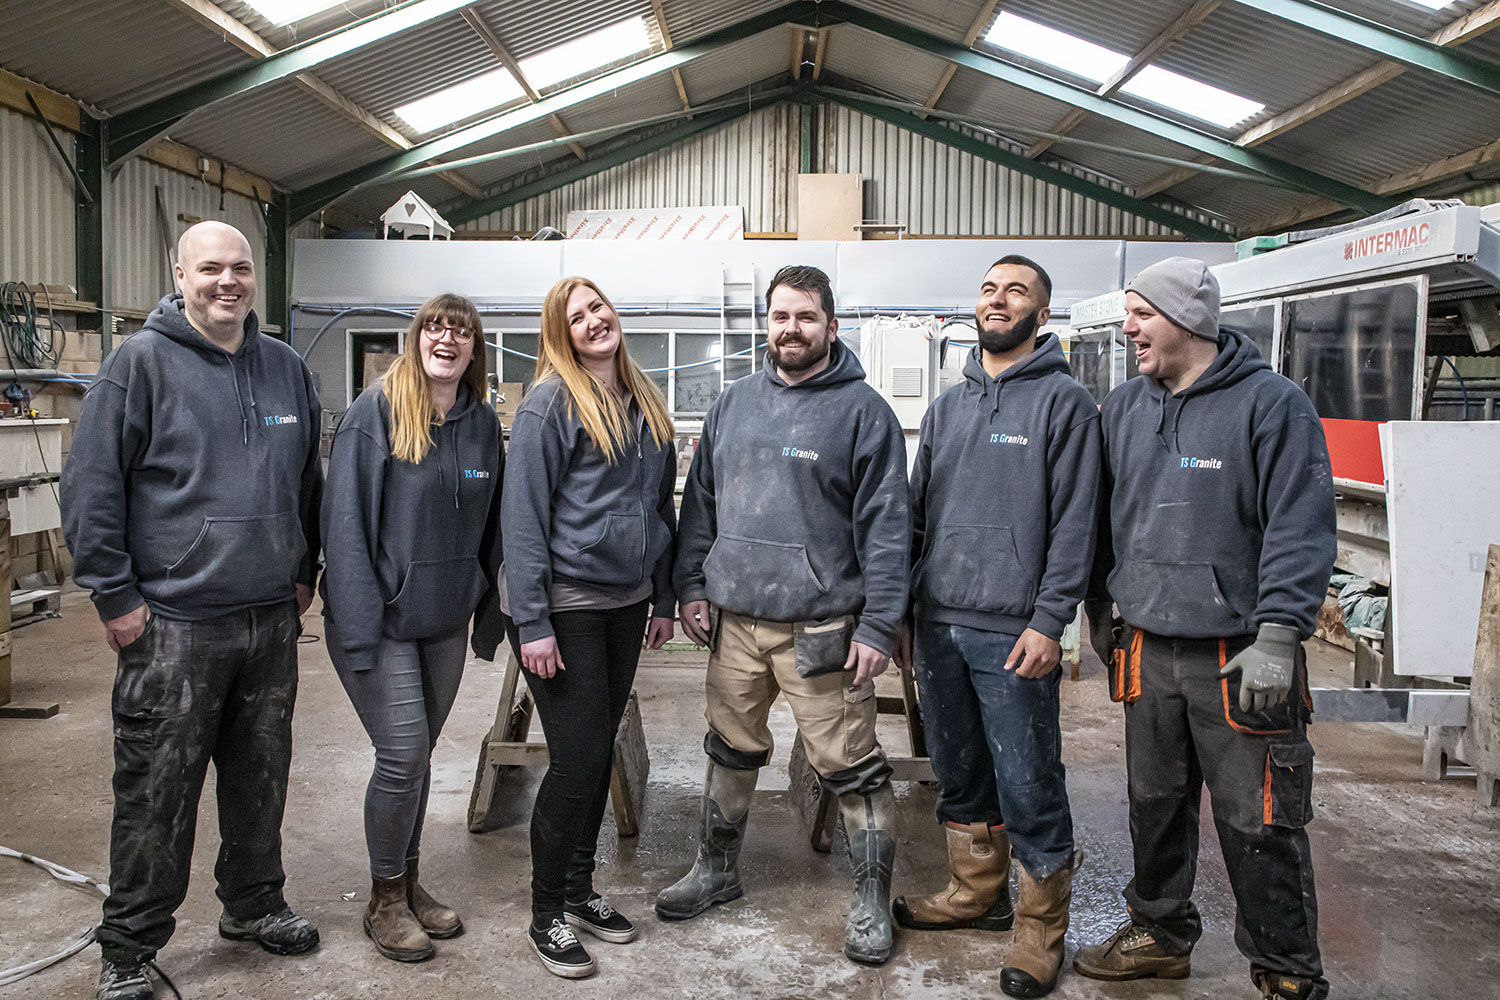 Staff at TS Granite in their Workshops, Part of an Advertising shoot.